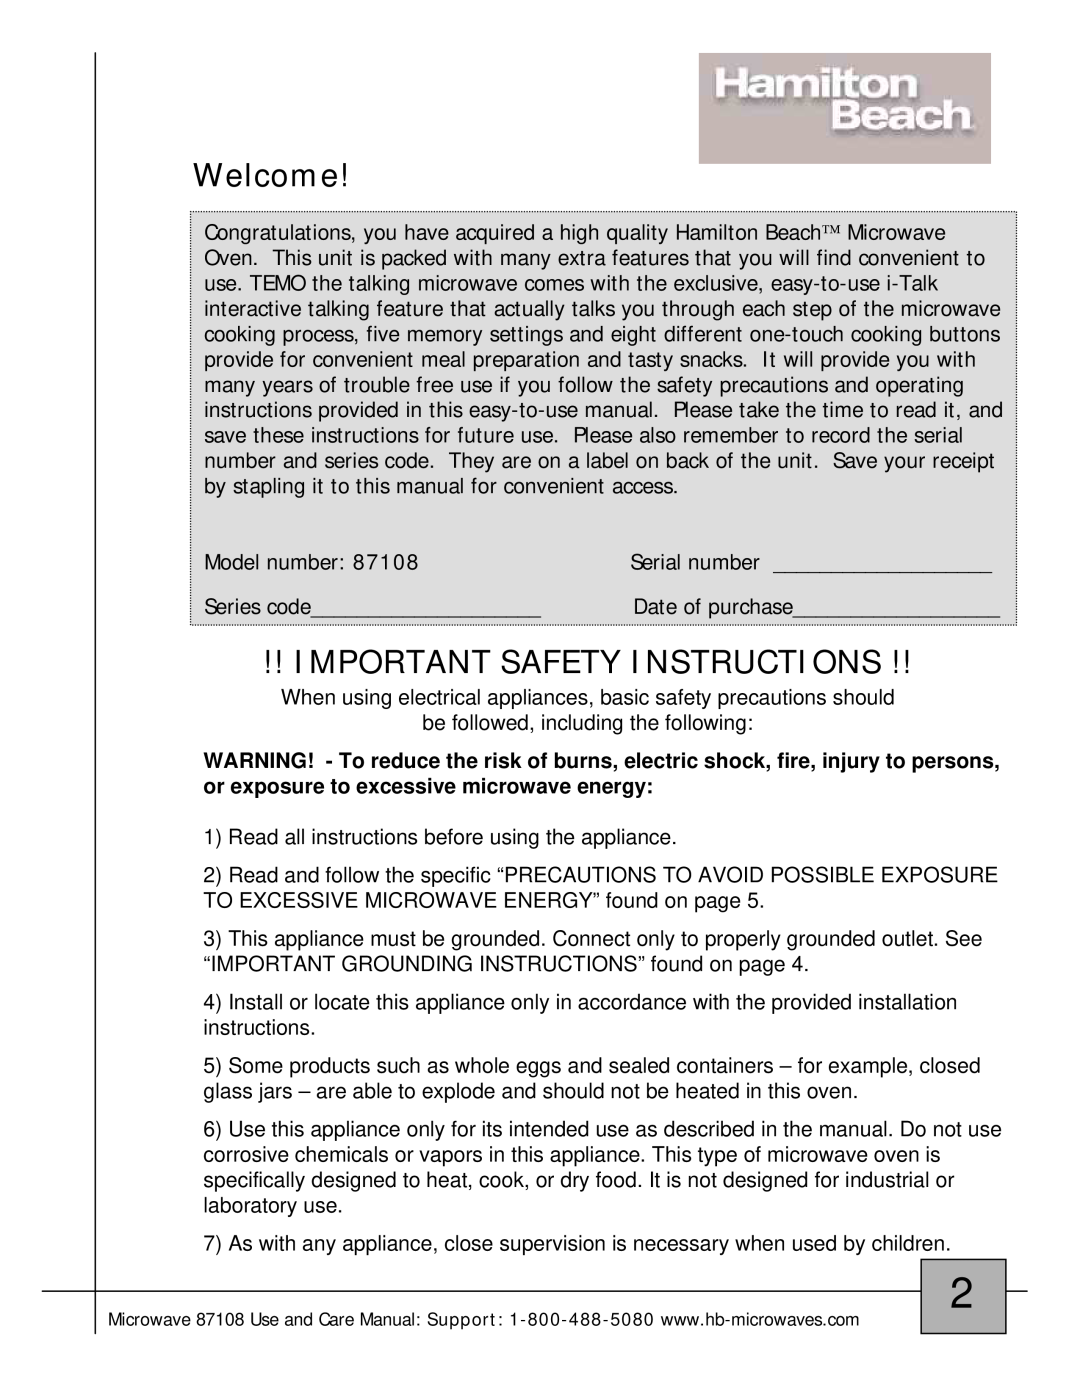 Hamilton Beach 87108 owner manual Welcome, Important Safety Instructions 